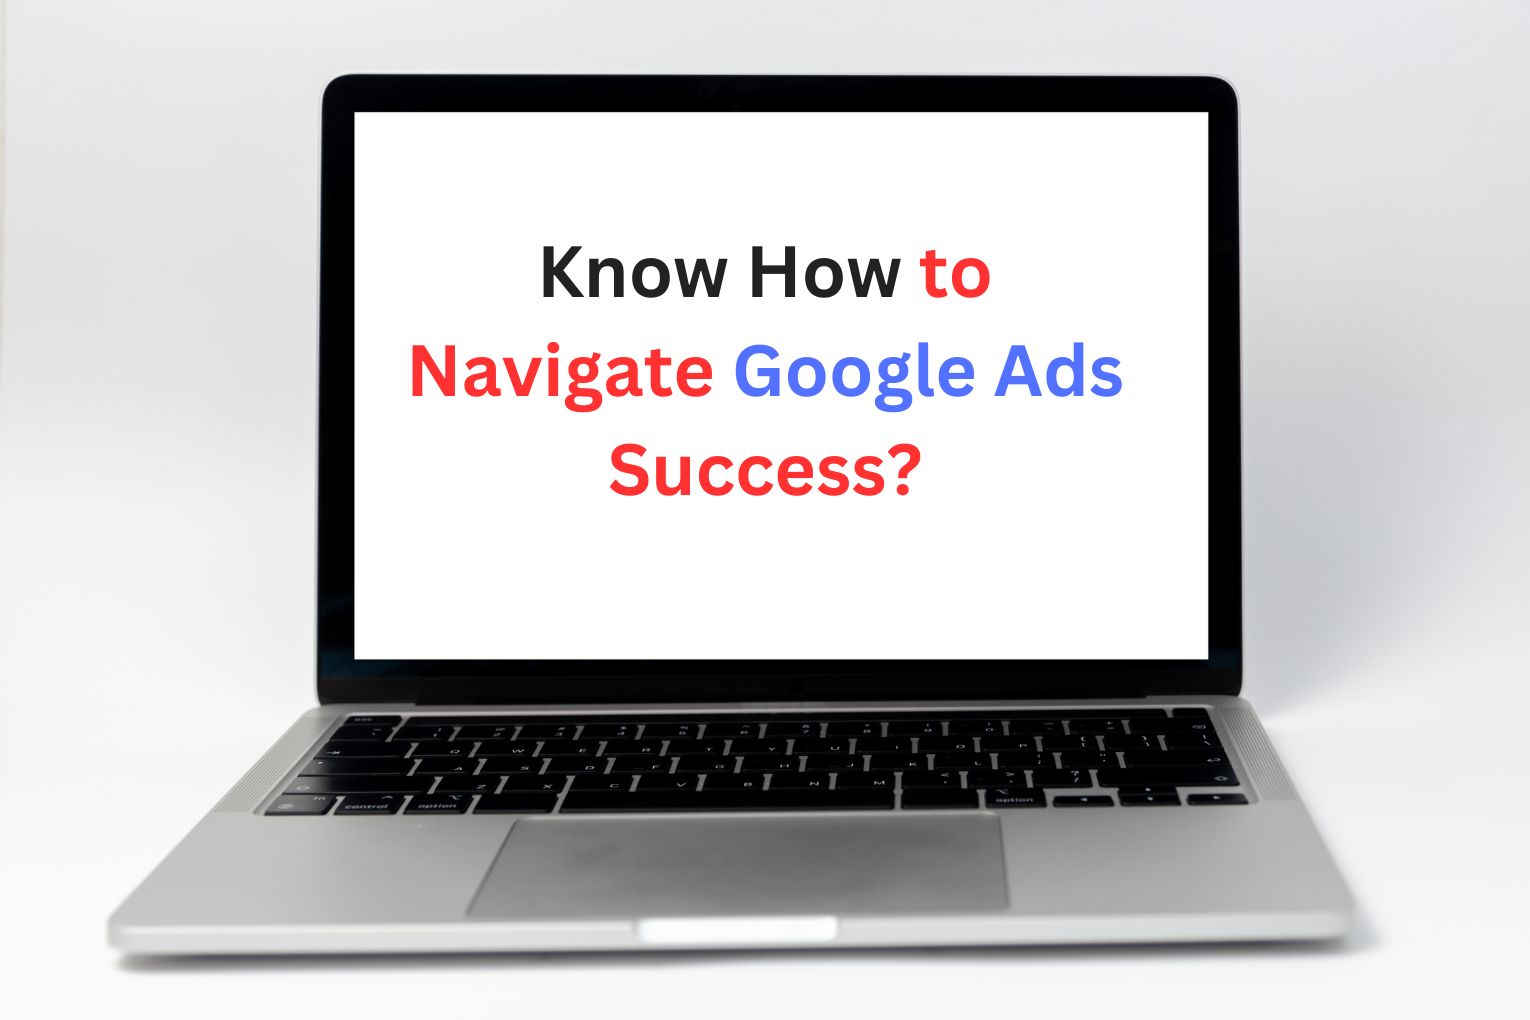 Know how to Navigate Google Ads Success